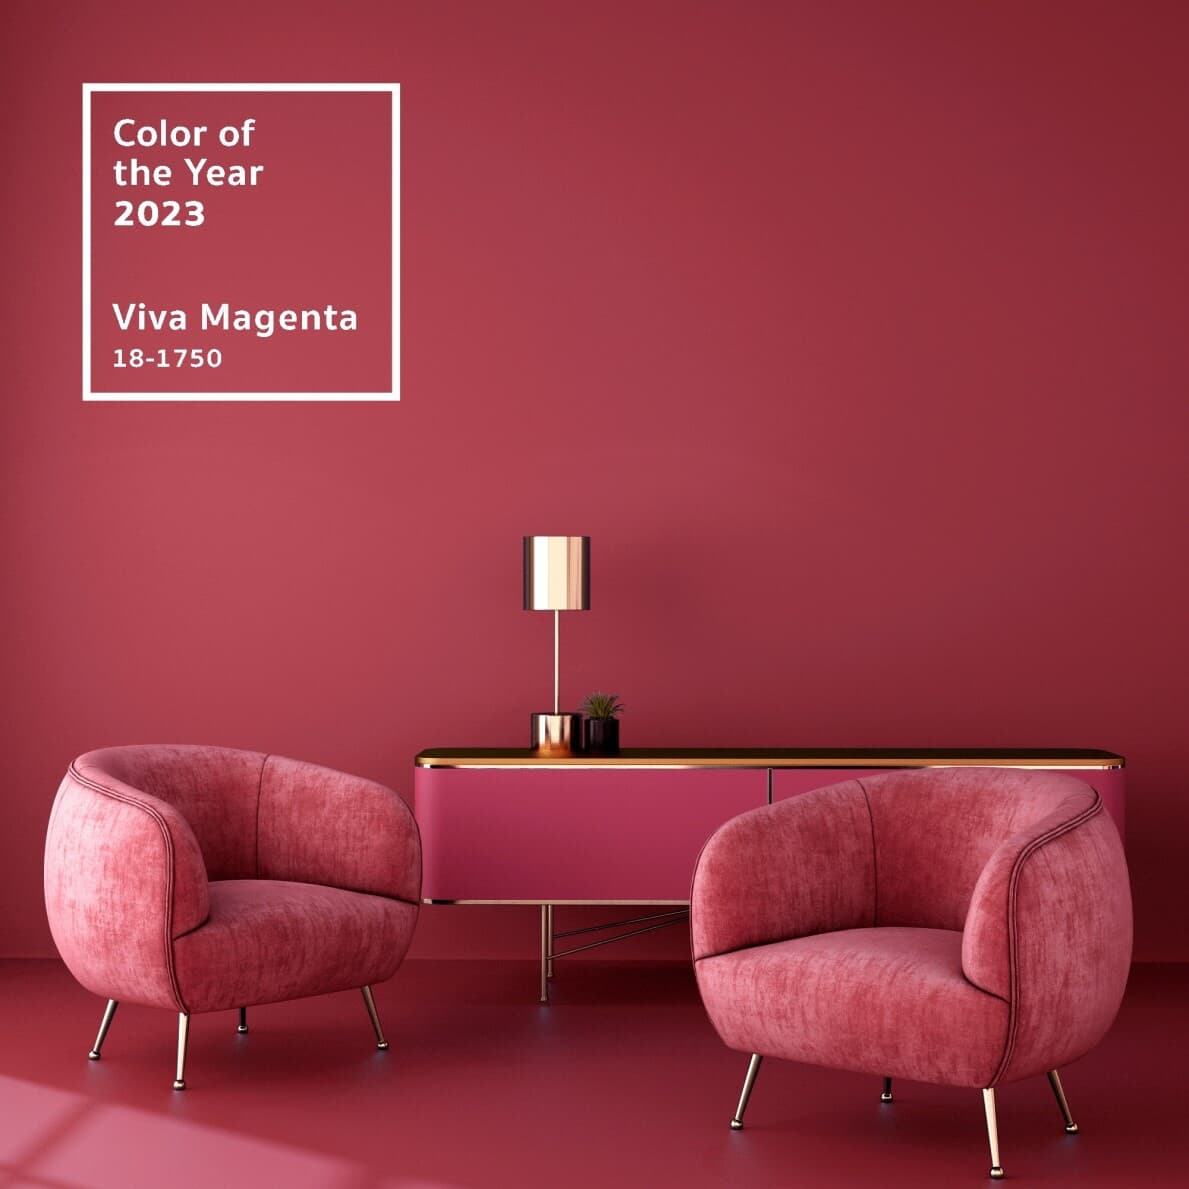 https://cdn.brookfieldresidential.net/-/media/brp/global/modules/news-and-blog/corporate/2023-color-of-the-year-home-design-ideas/color-of-the-year-viva-magenta-in-interior-design-1189.jpg?rev=90f0eb8f5f954154b2d3873903ca03f1&cx=0.5&cy=0.5